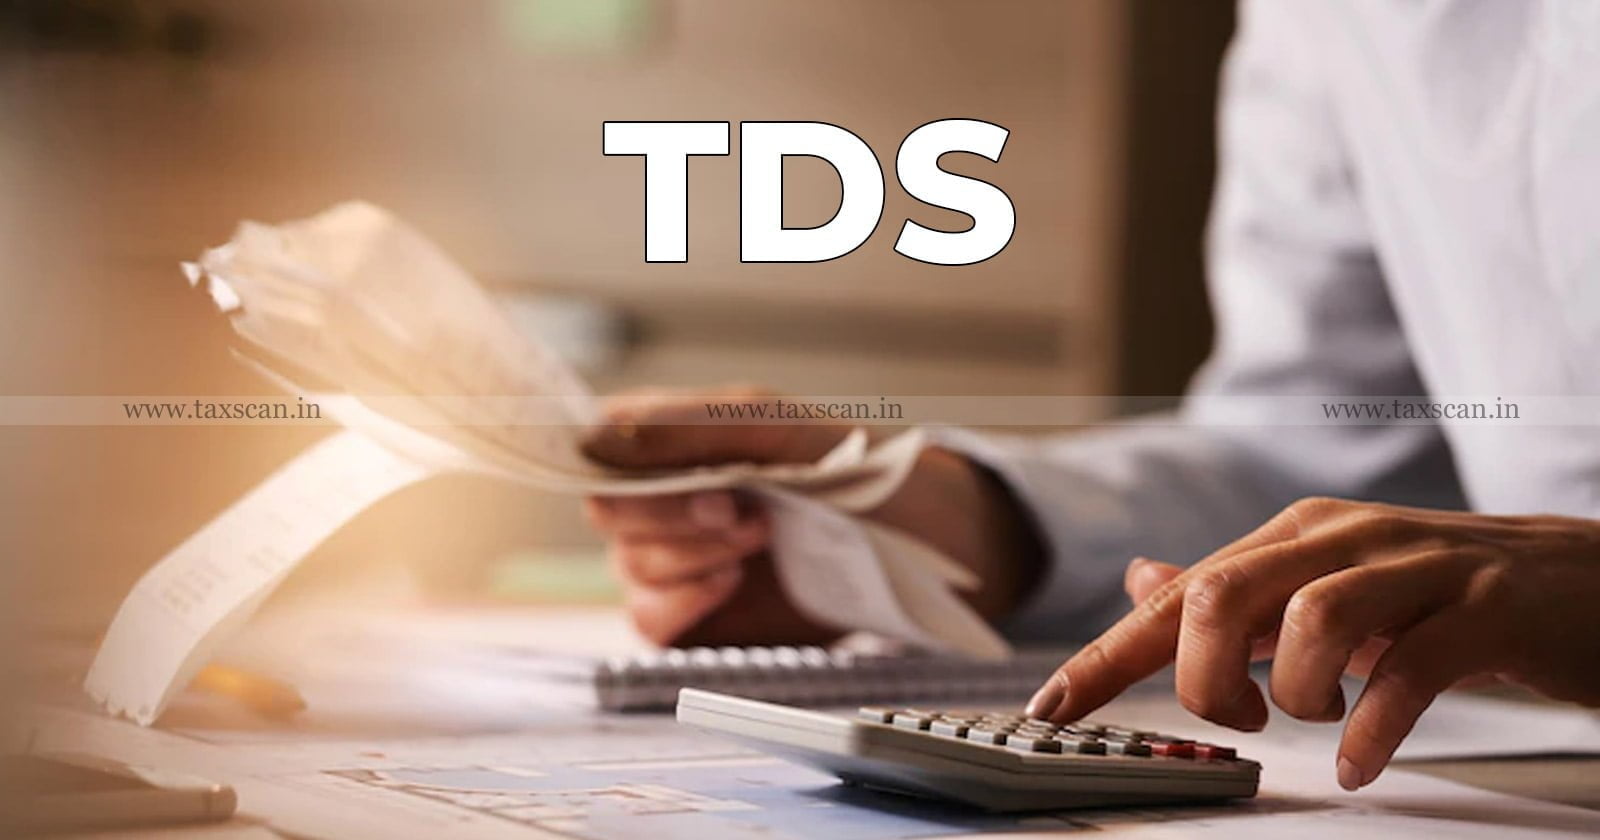 TDS - Payments - Non - Residence - ITAT - TAXSCAN